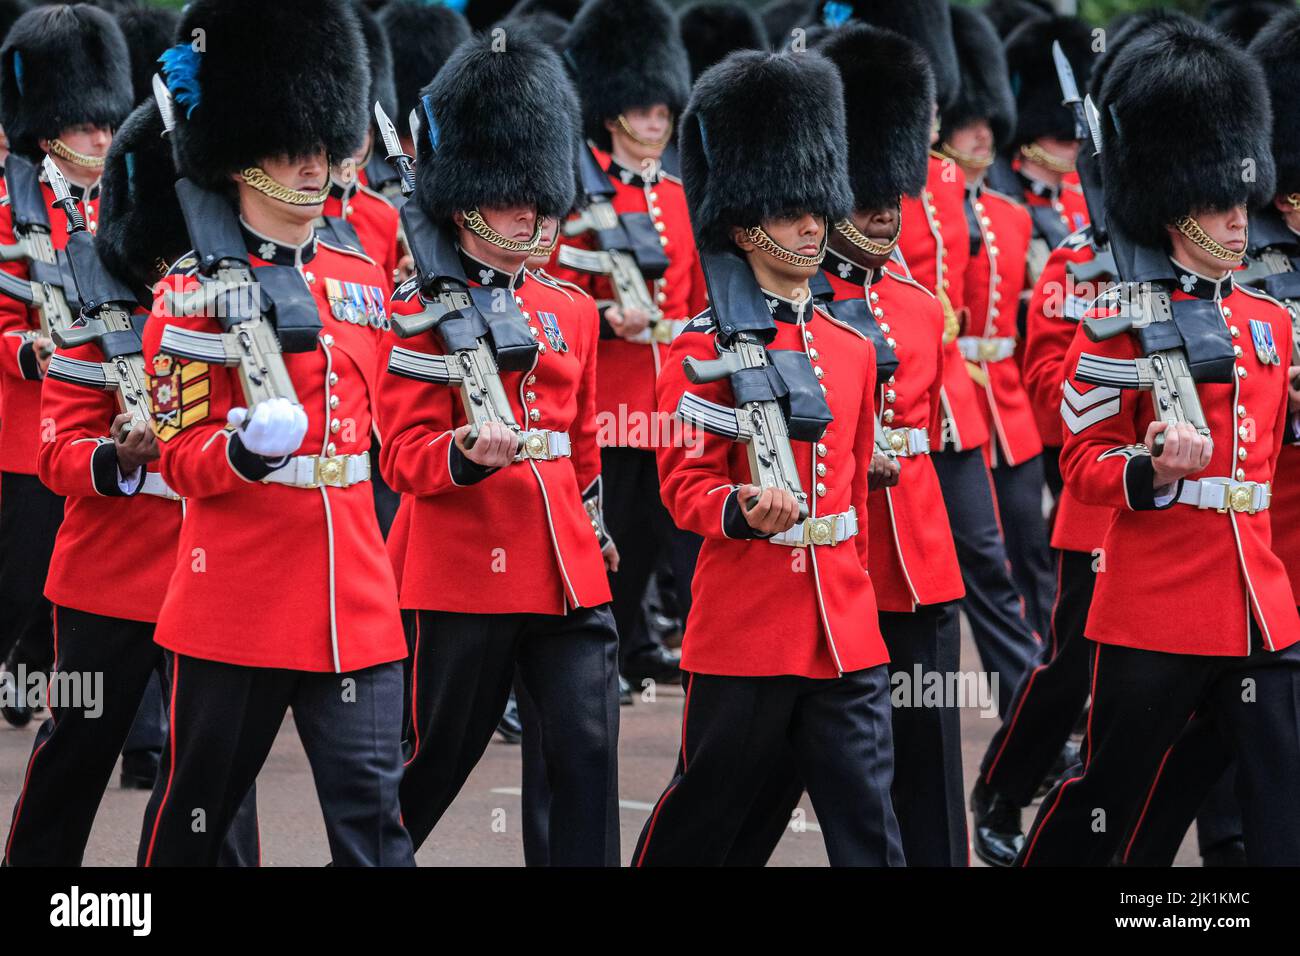 Platinum Jubilee Trooping the Colour parade, guards in traditional red uniform and bear skin hat marching, London, England, UK Stock Photo